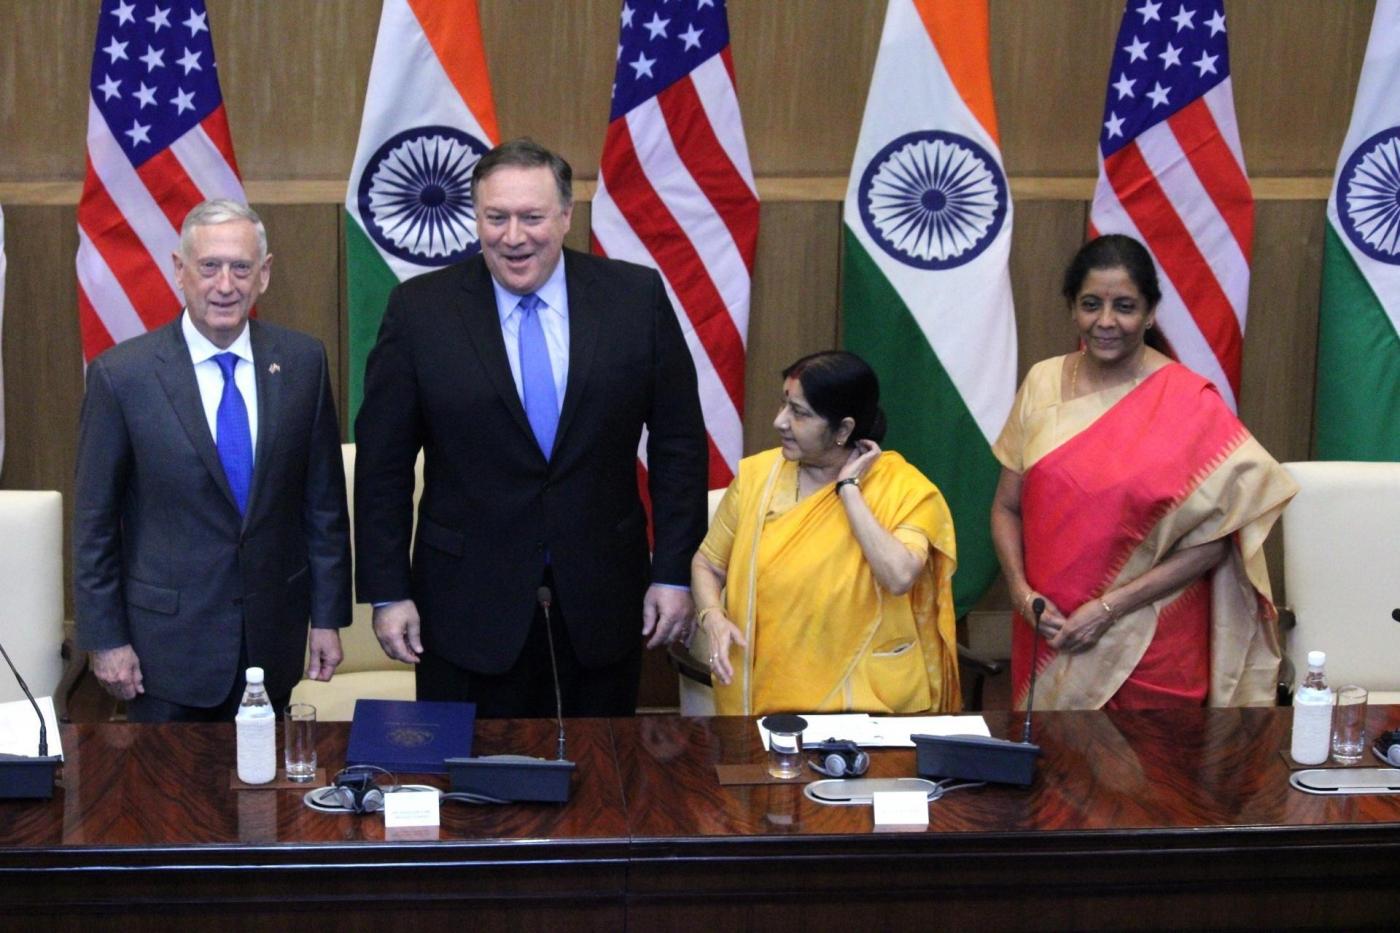 New Delhi: External Affairs Minister Sushma Swaraj and Defence Minister Nirmala Sitharaman with US Secretary of State Mike Pompeo and Defence Secretary James Mattis during high-level 2+2 dialogue in New Delhi on Sept 6, 2018. (Photo: Amlan Paliwal/IANS) by .